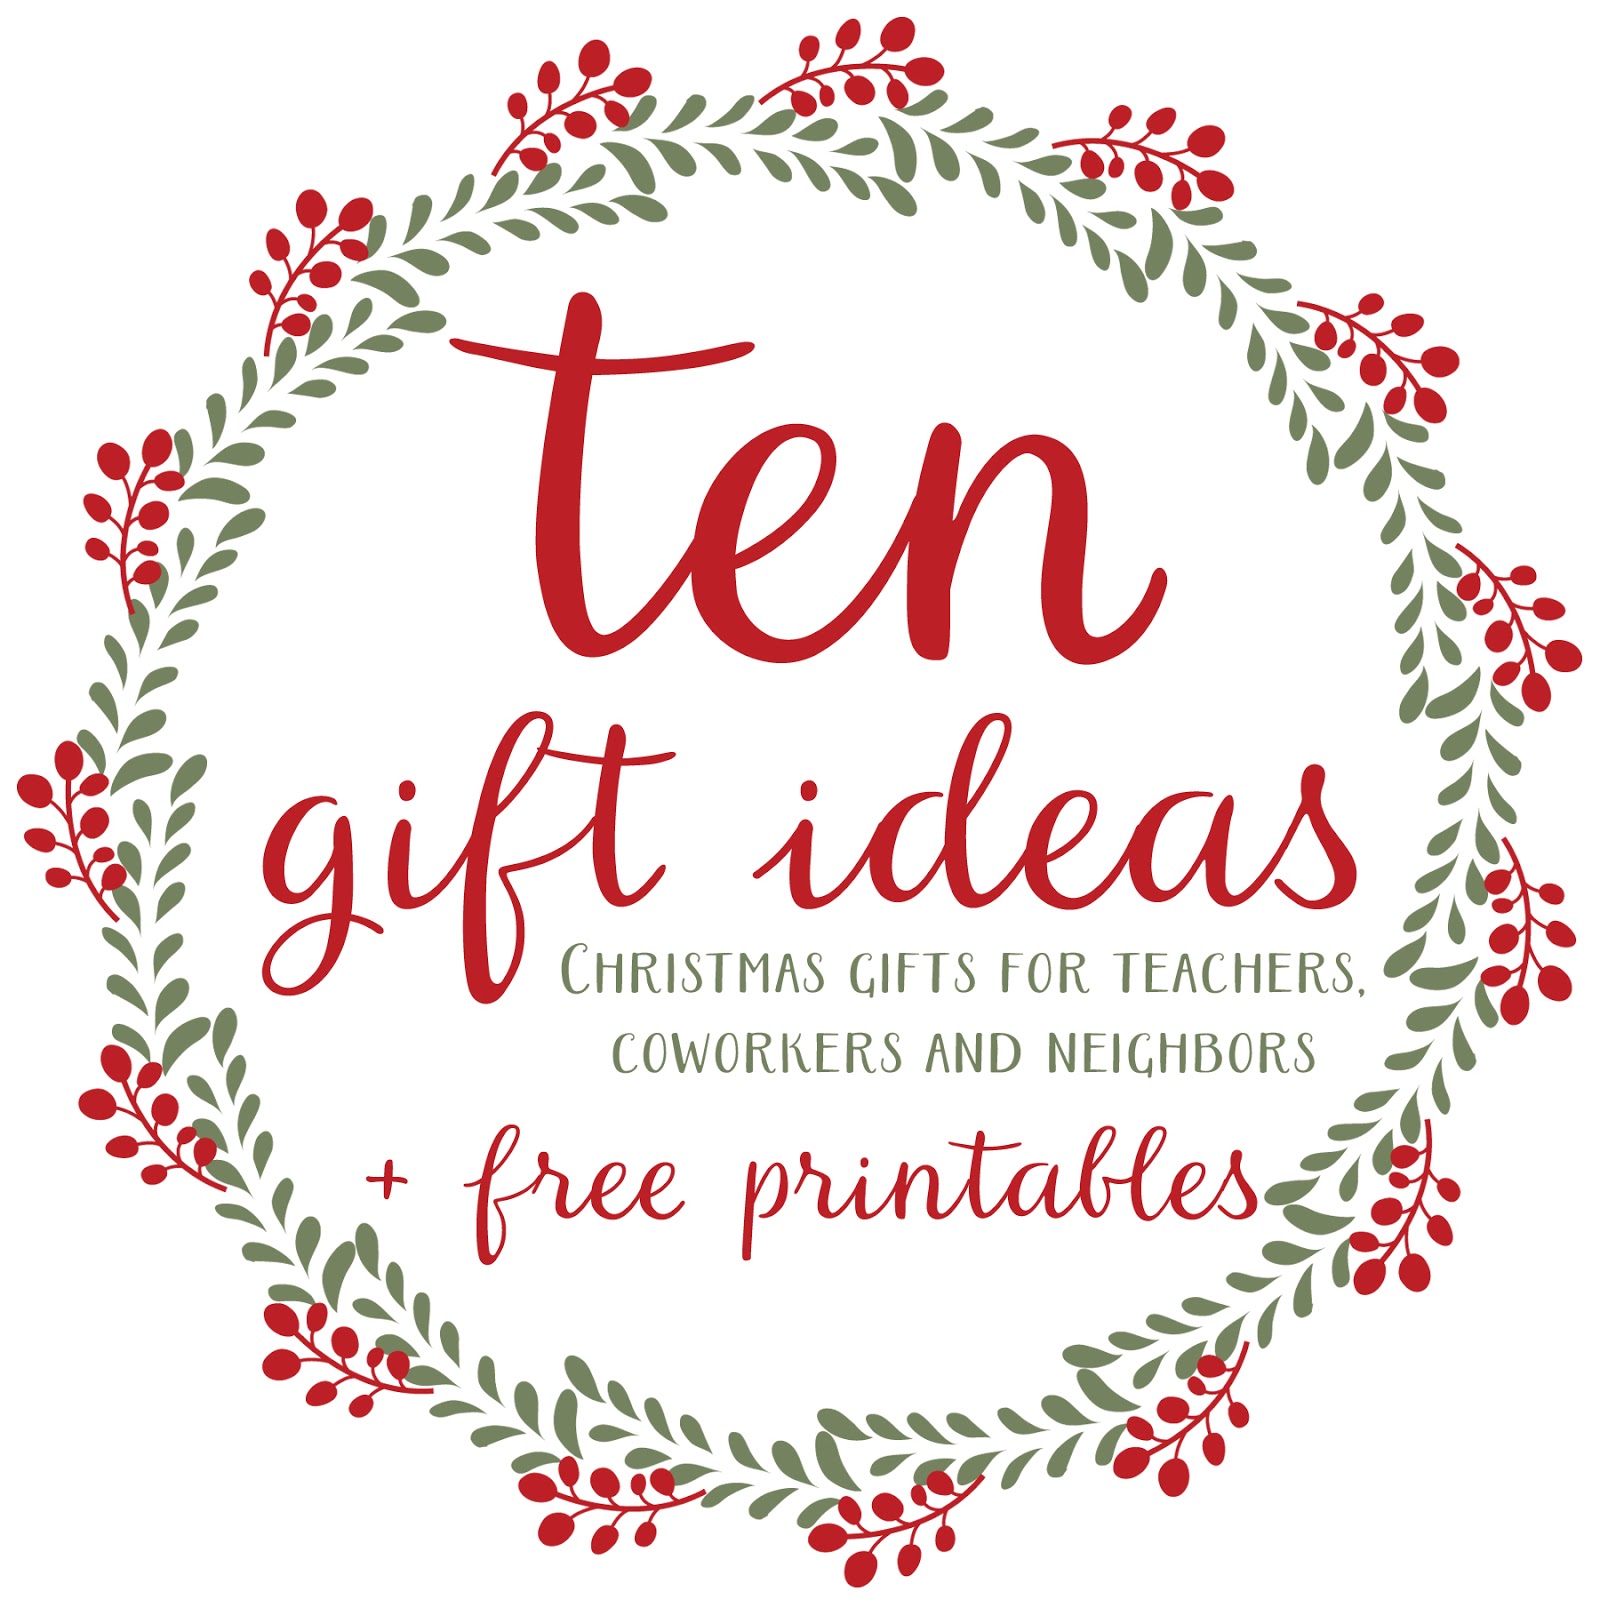 Still looking for that perfect Christmas neighbor gift to give this year? Look no further! Here is a great idea for under $1 (and a roundup of more ideas!)